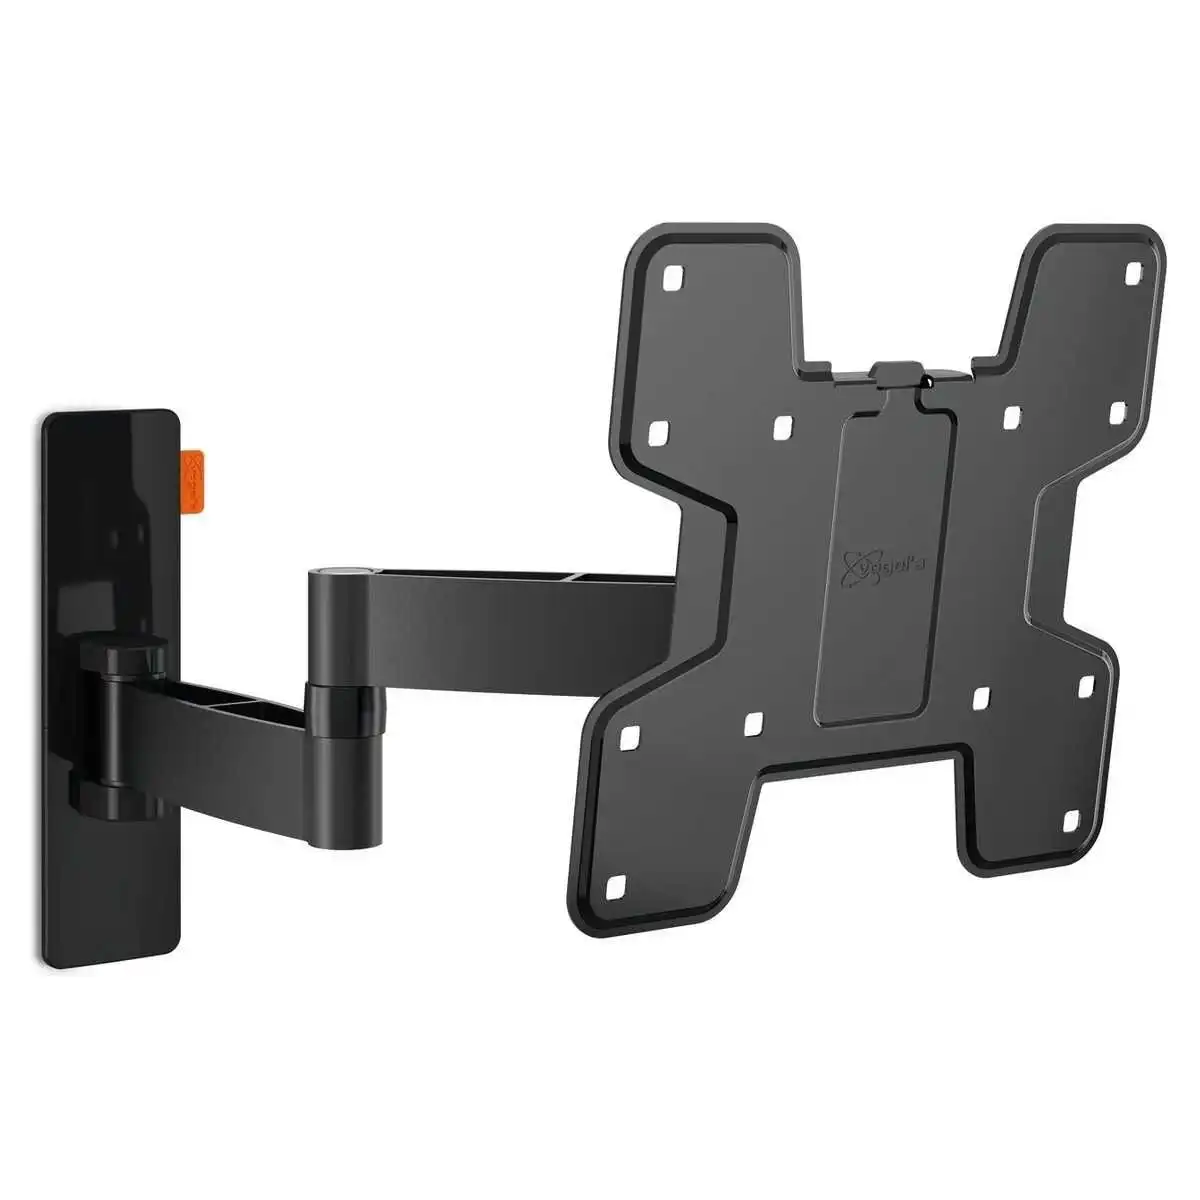 Vogel's Full Motion TV Wall Mount For 19 to 40 Inch TVs